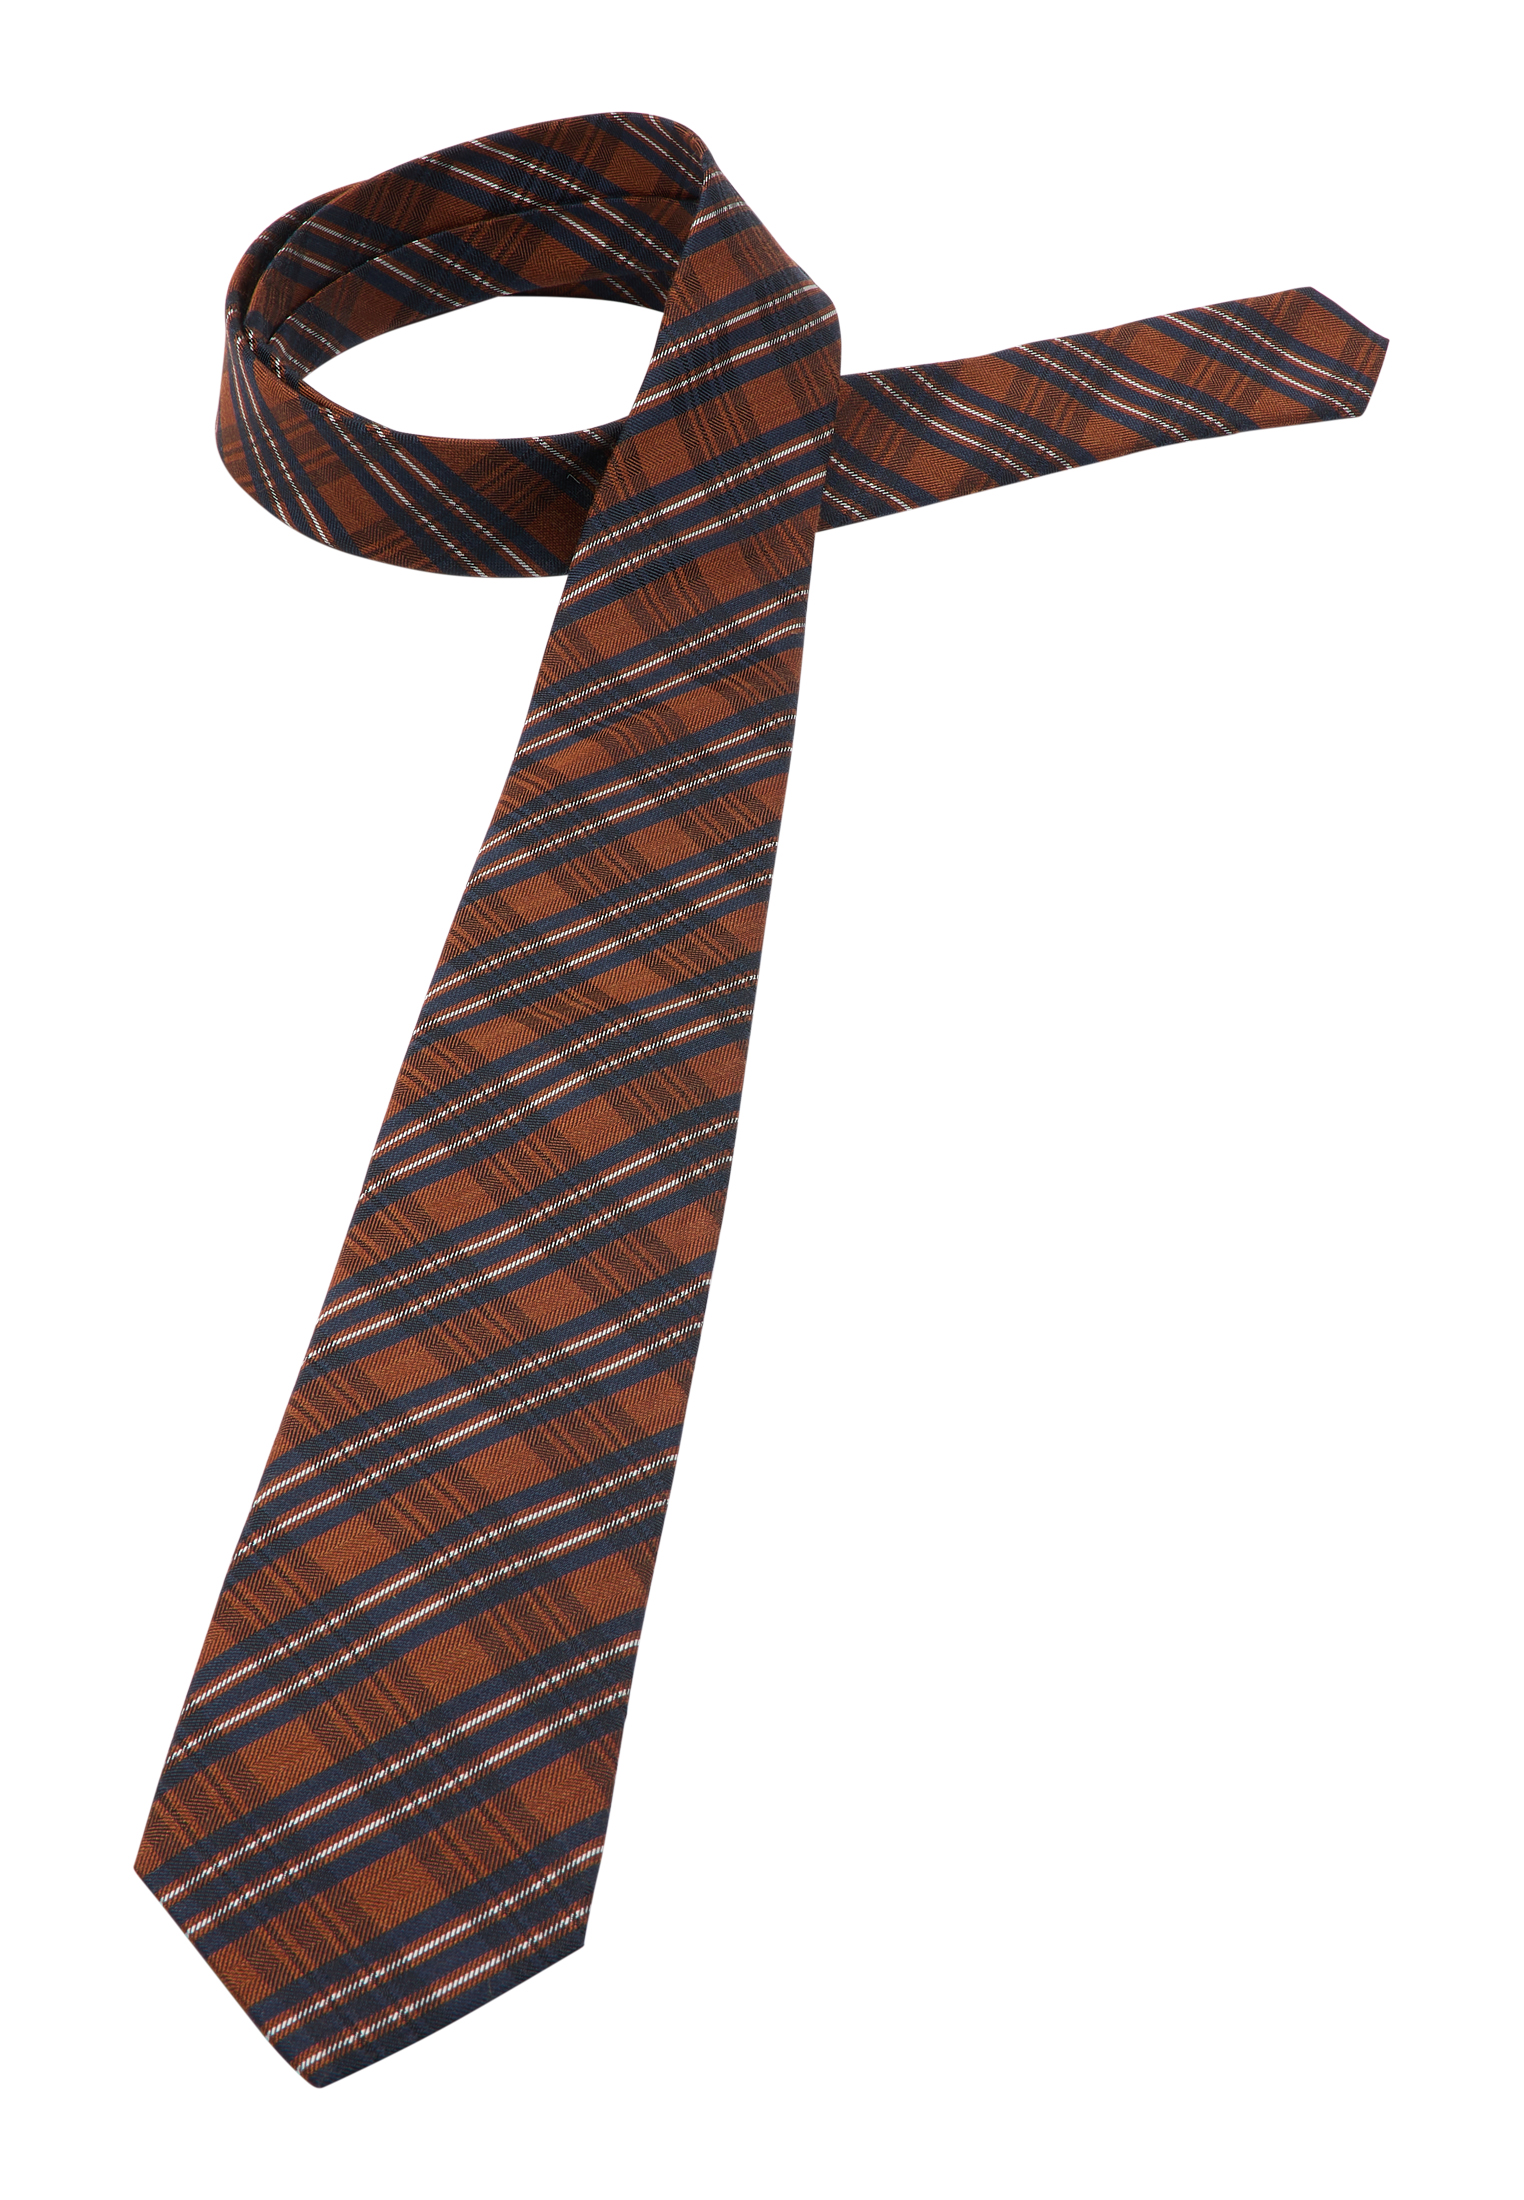 checkered | | Tie | in brown 1AC01934-02-91-142 142 brown